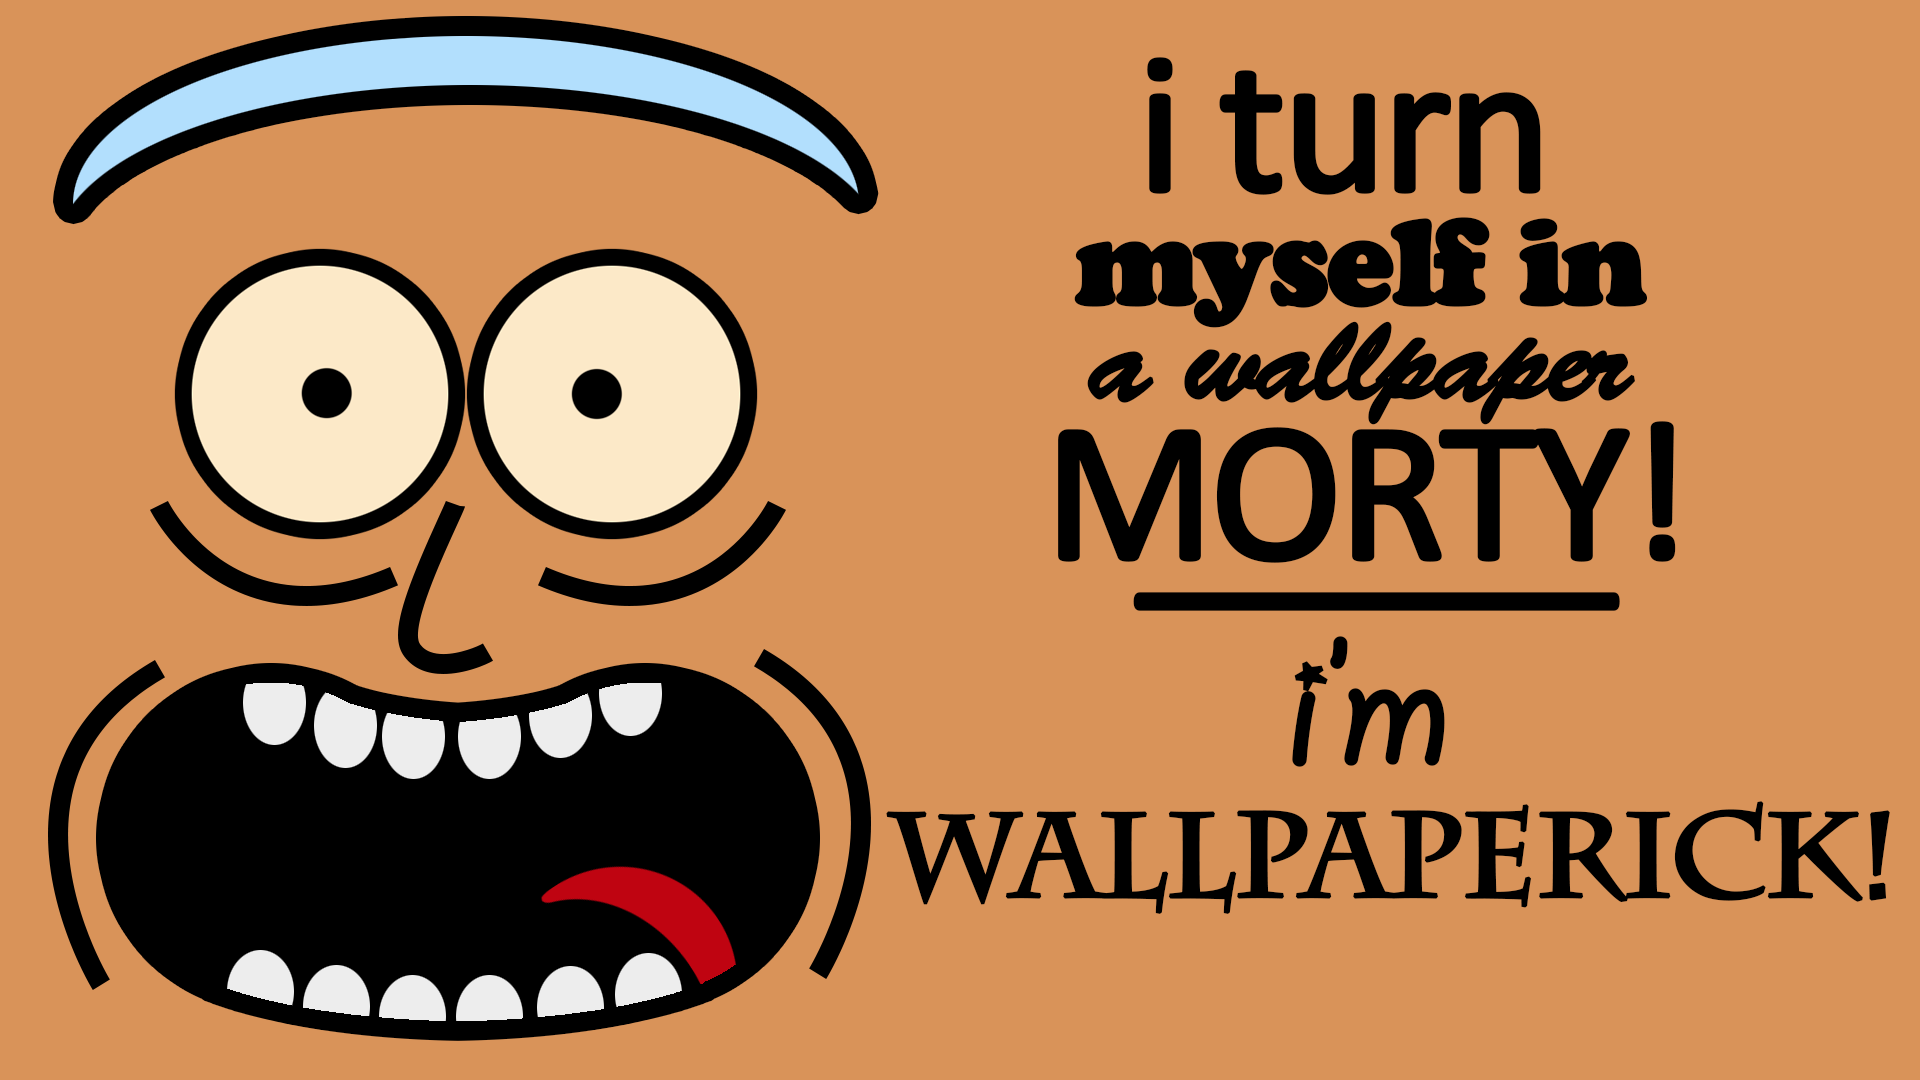 General 1920x1080 Rick and Morty vector cartoon open mouth brown background brown humor bad grammar simple background digital art text